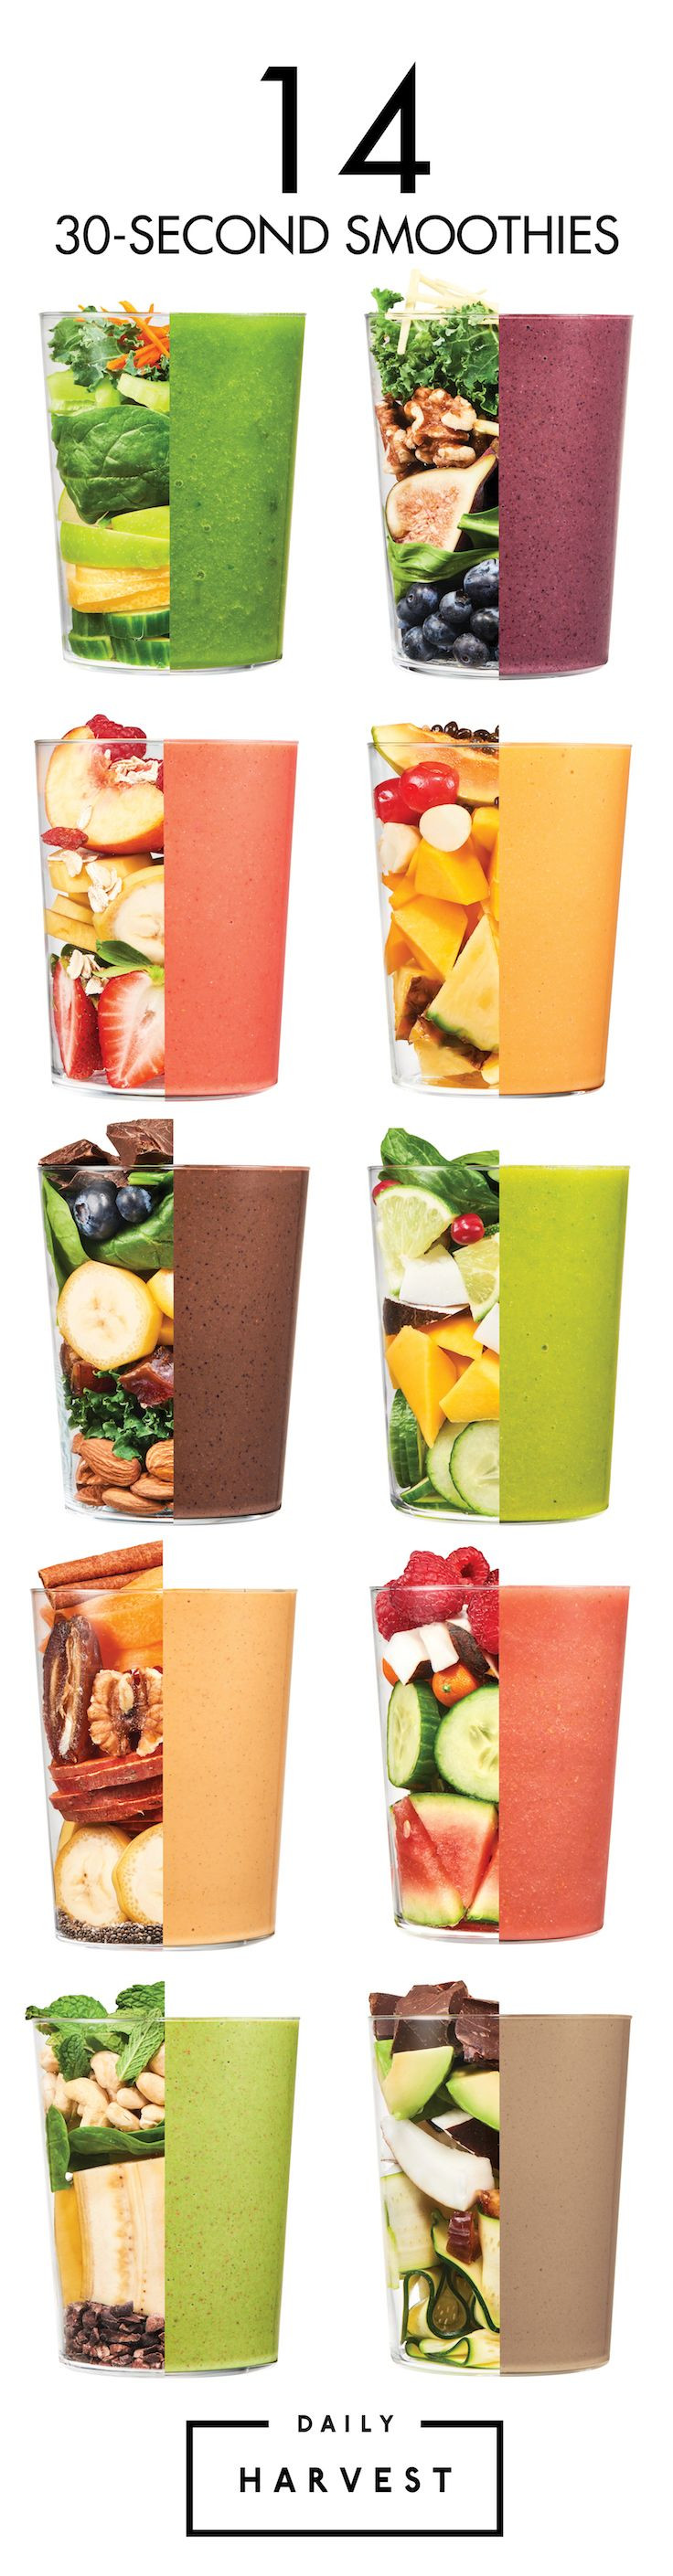 Healthy Pre Made Smoothies
 Want delicious healthy smoothies without all the fuss